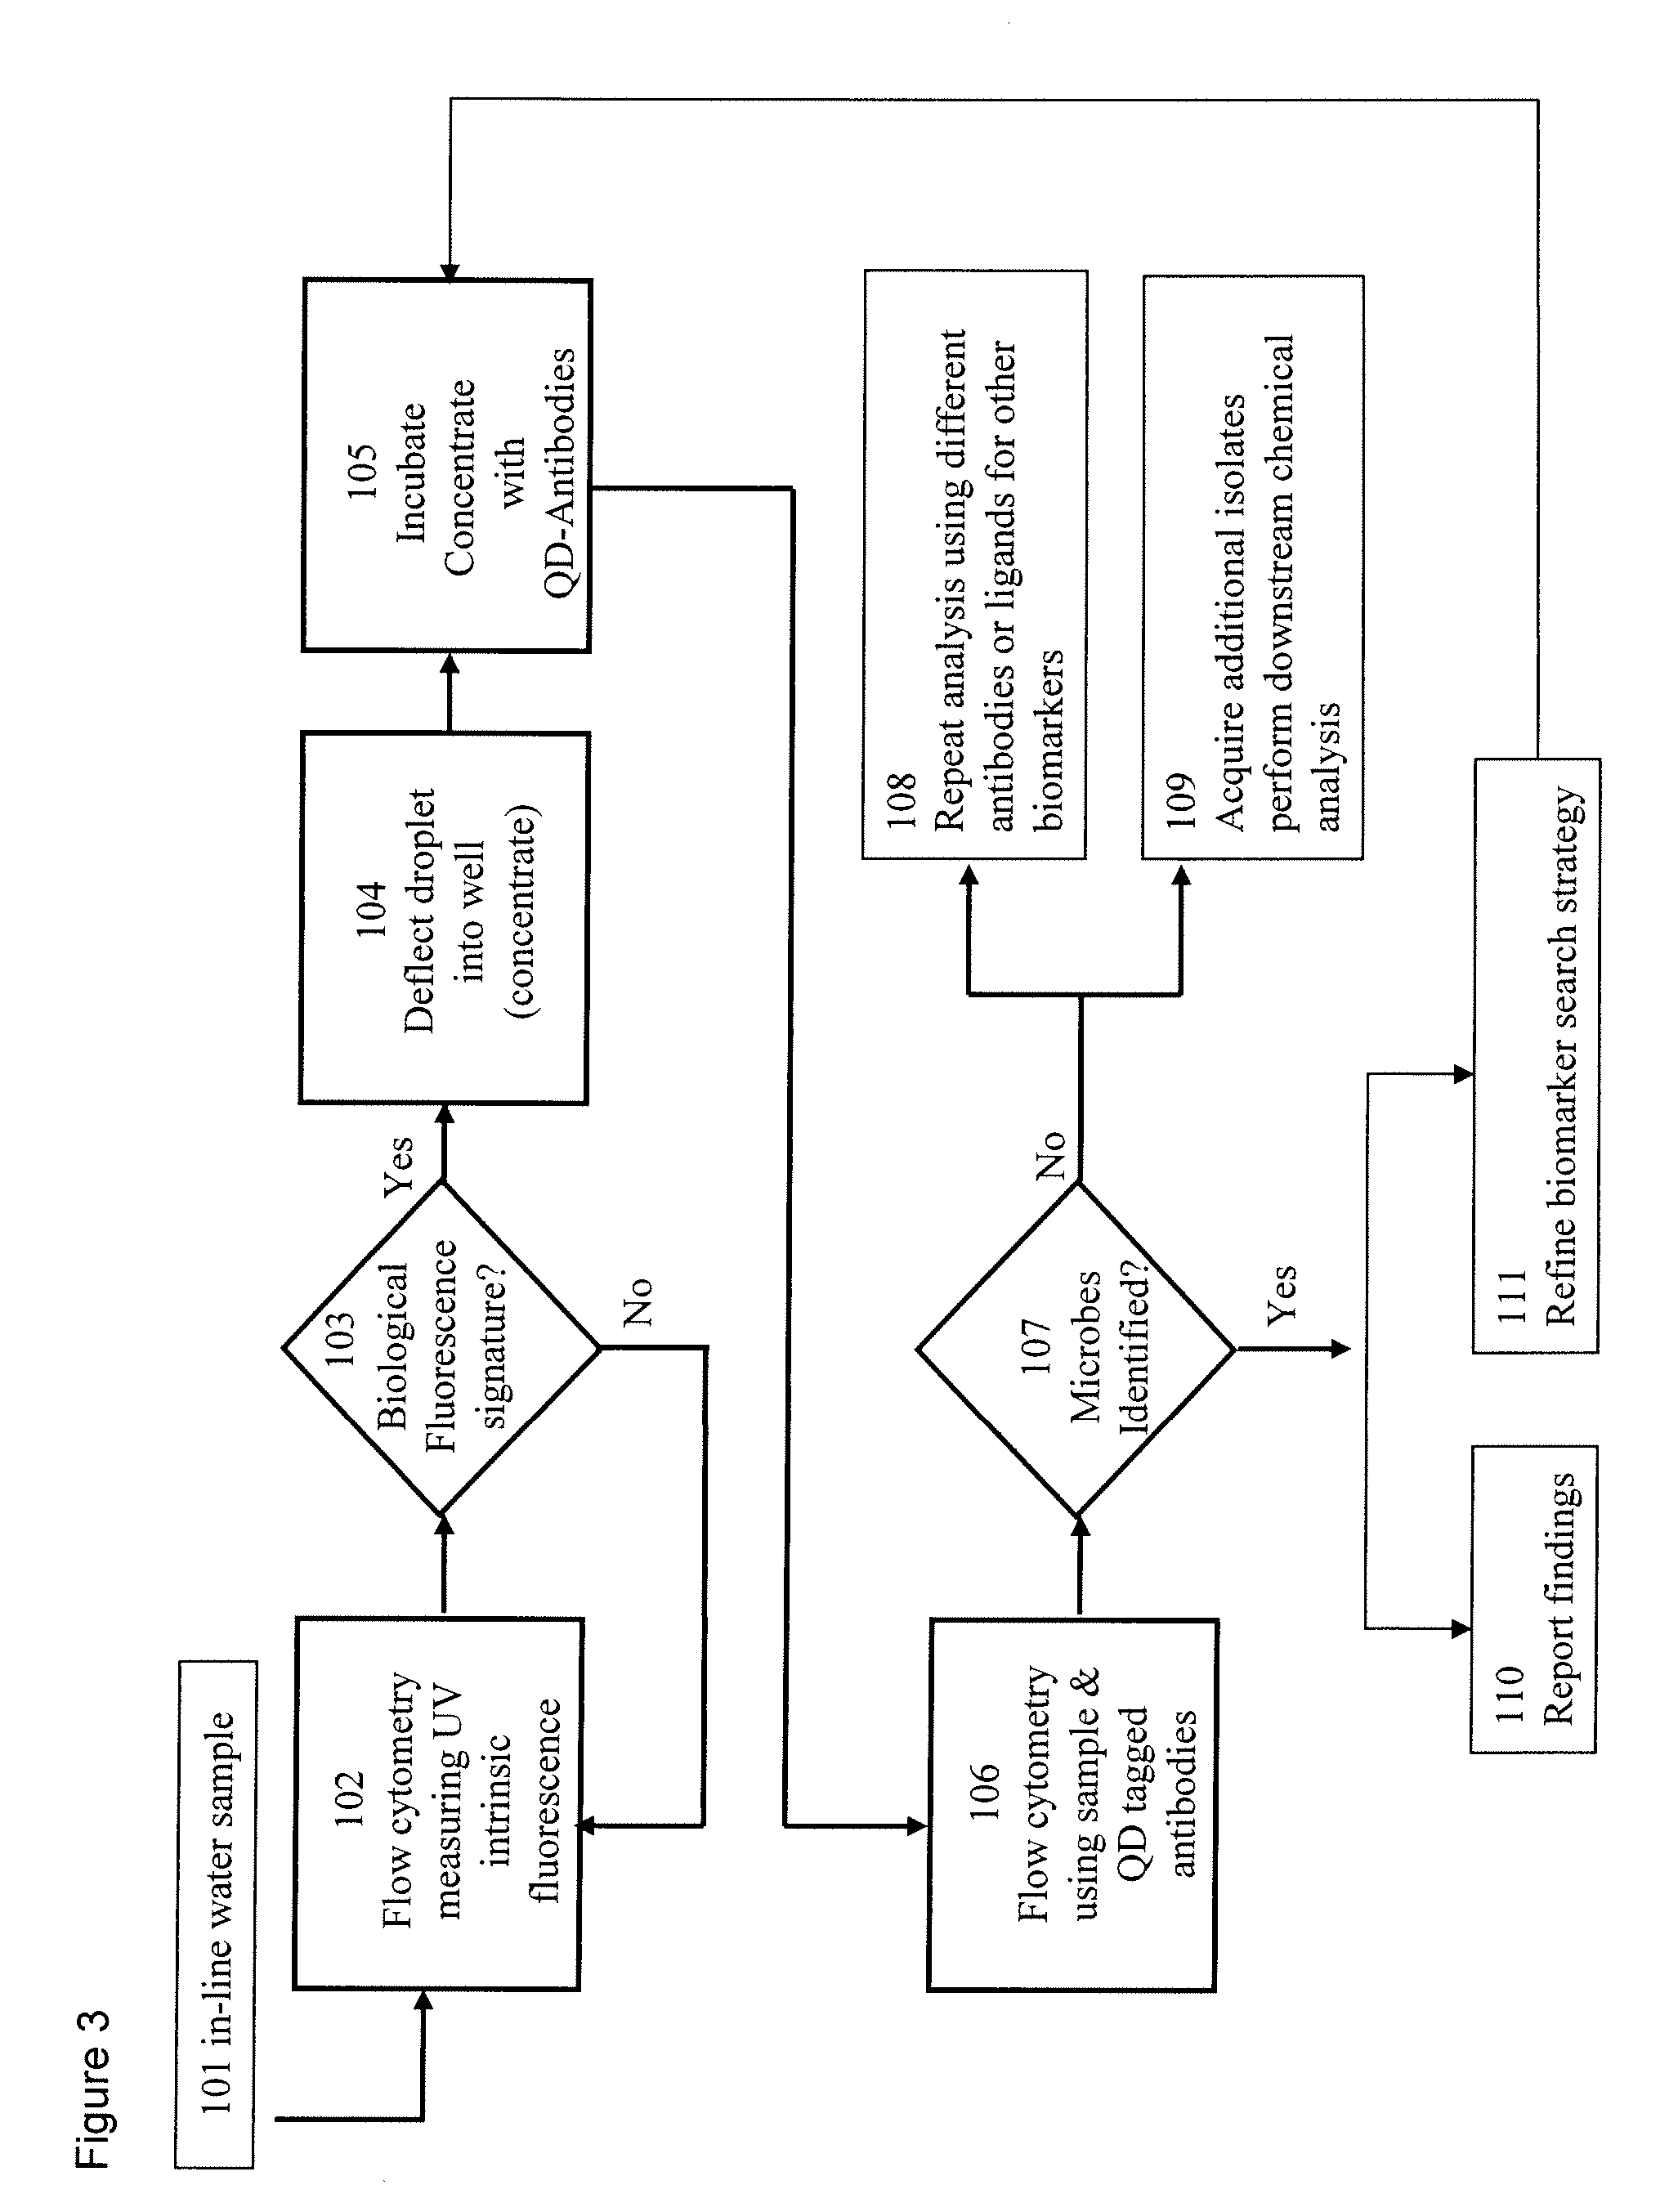 System and method for monitoring an analyte